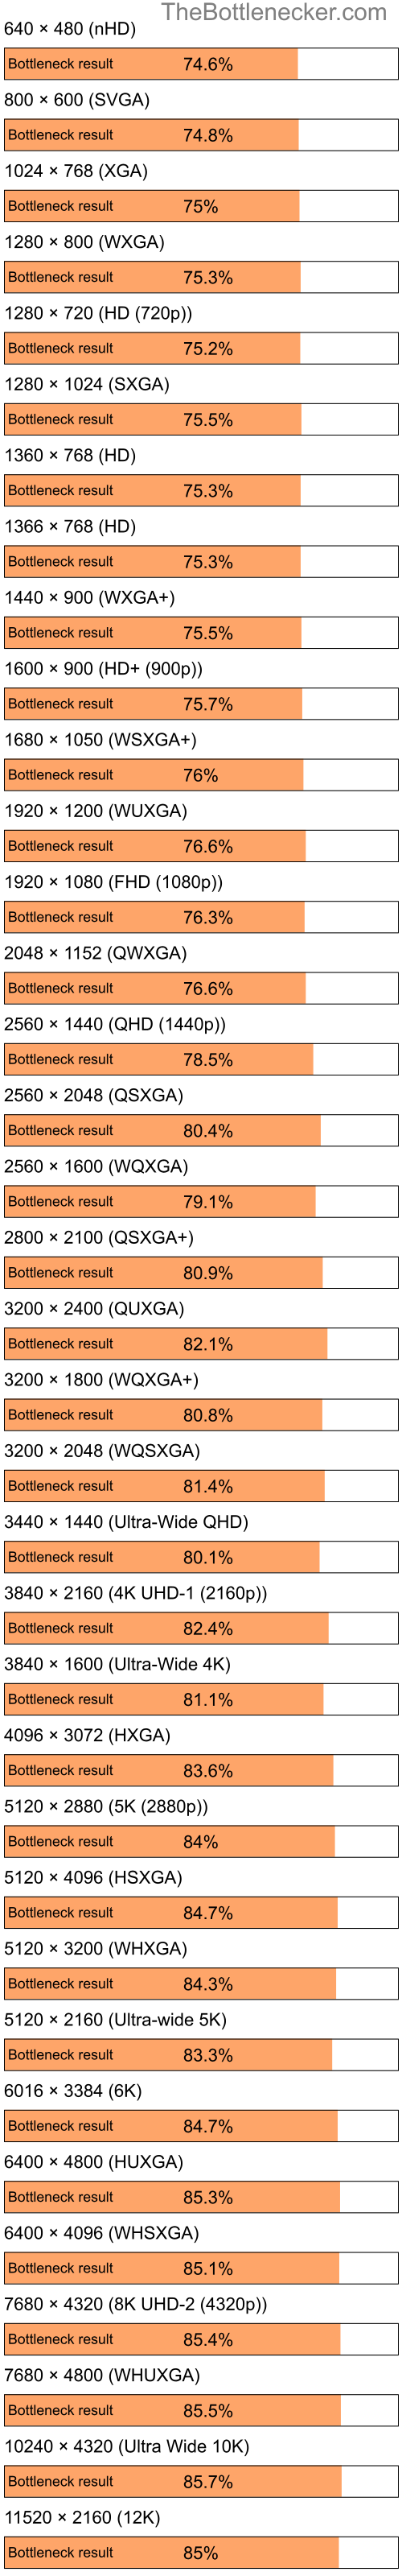 Bottleneck results by resolution for Intel Atom Z520 and AMD Radeon Xpress 1200 in General Tasks